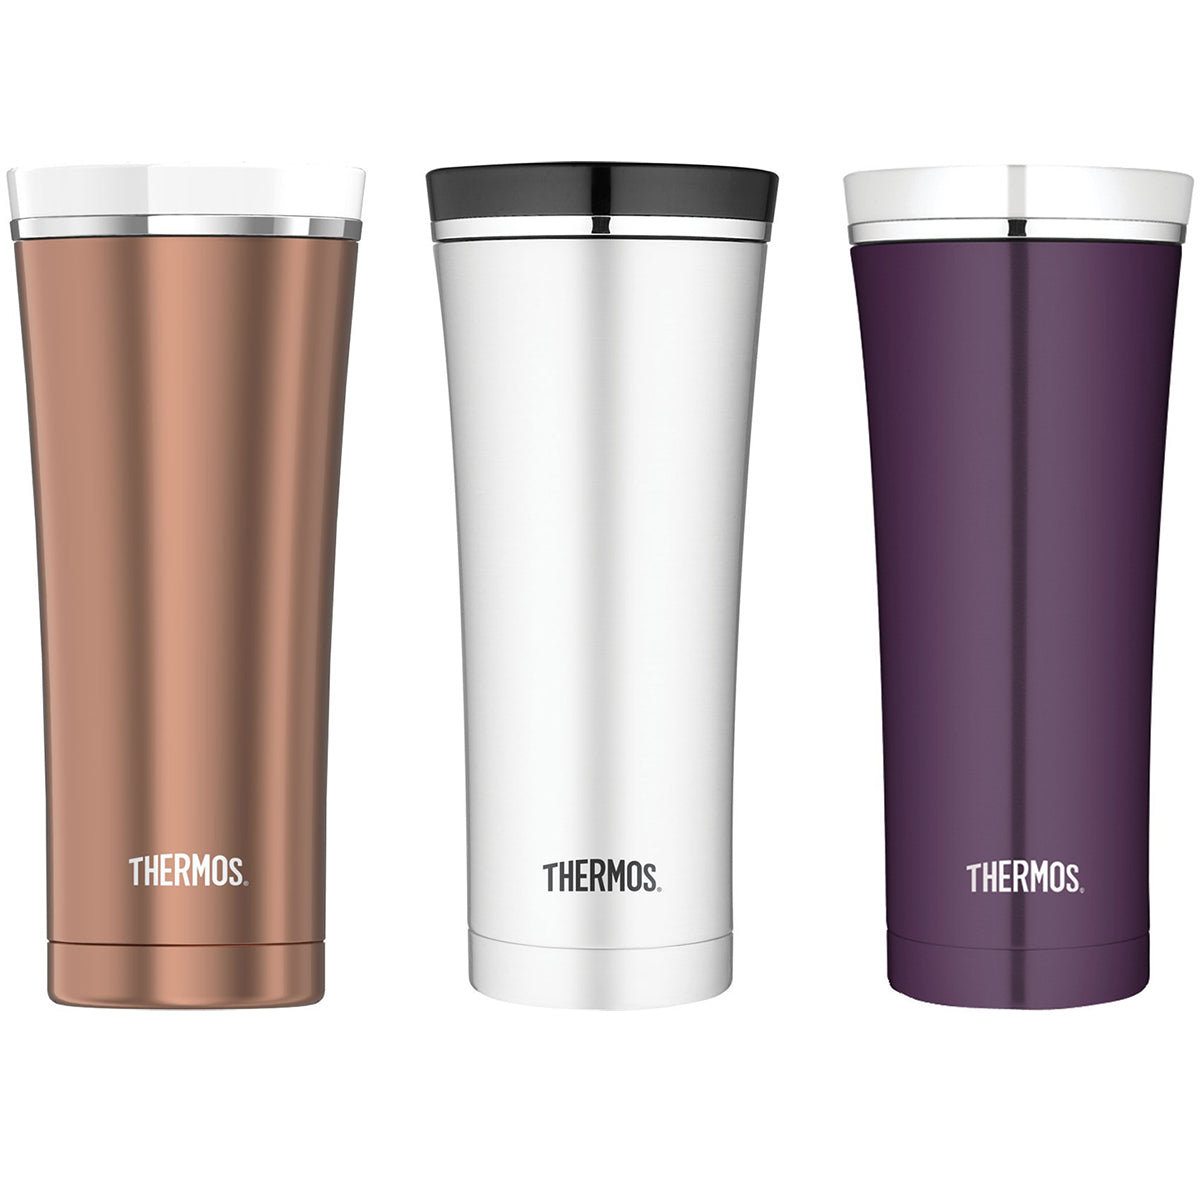 Thermos 16 oz. Sipp Vacuum Insulated Stainless Steel Travel Tumbler Thermos